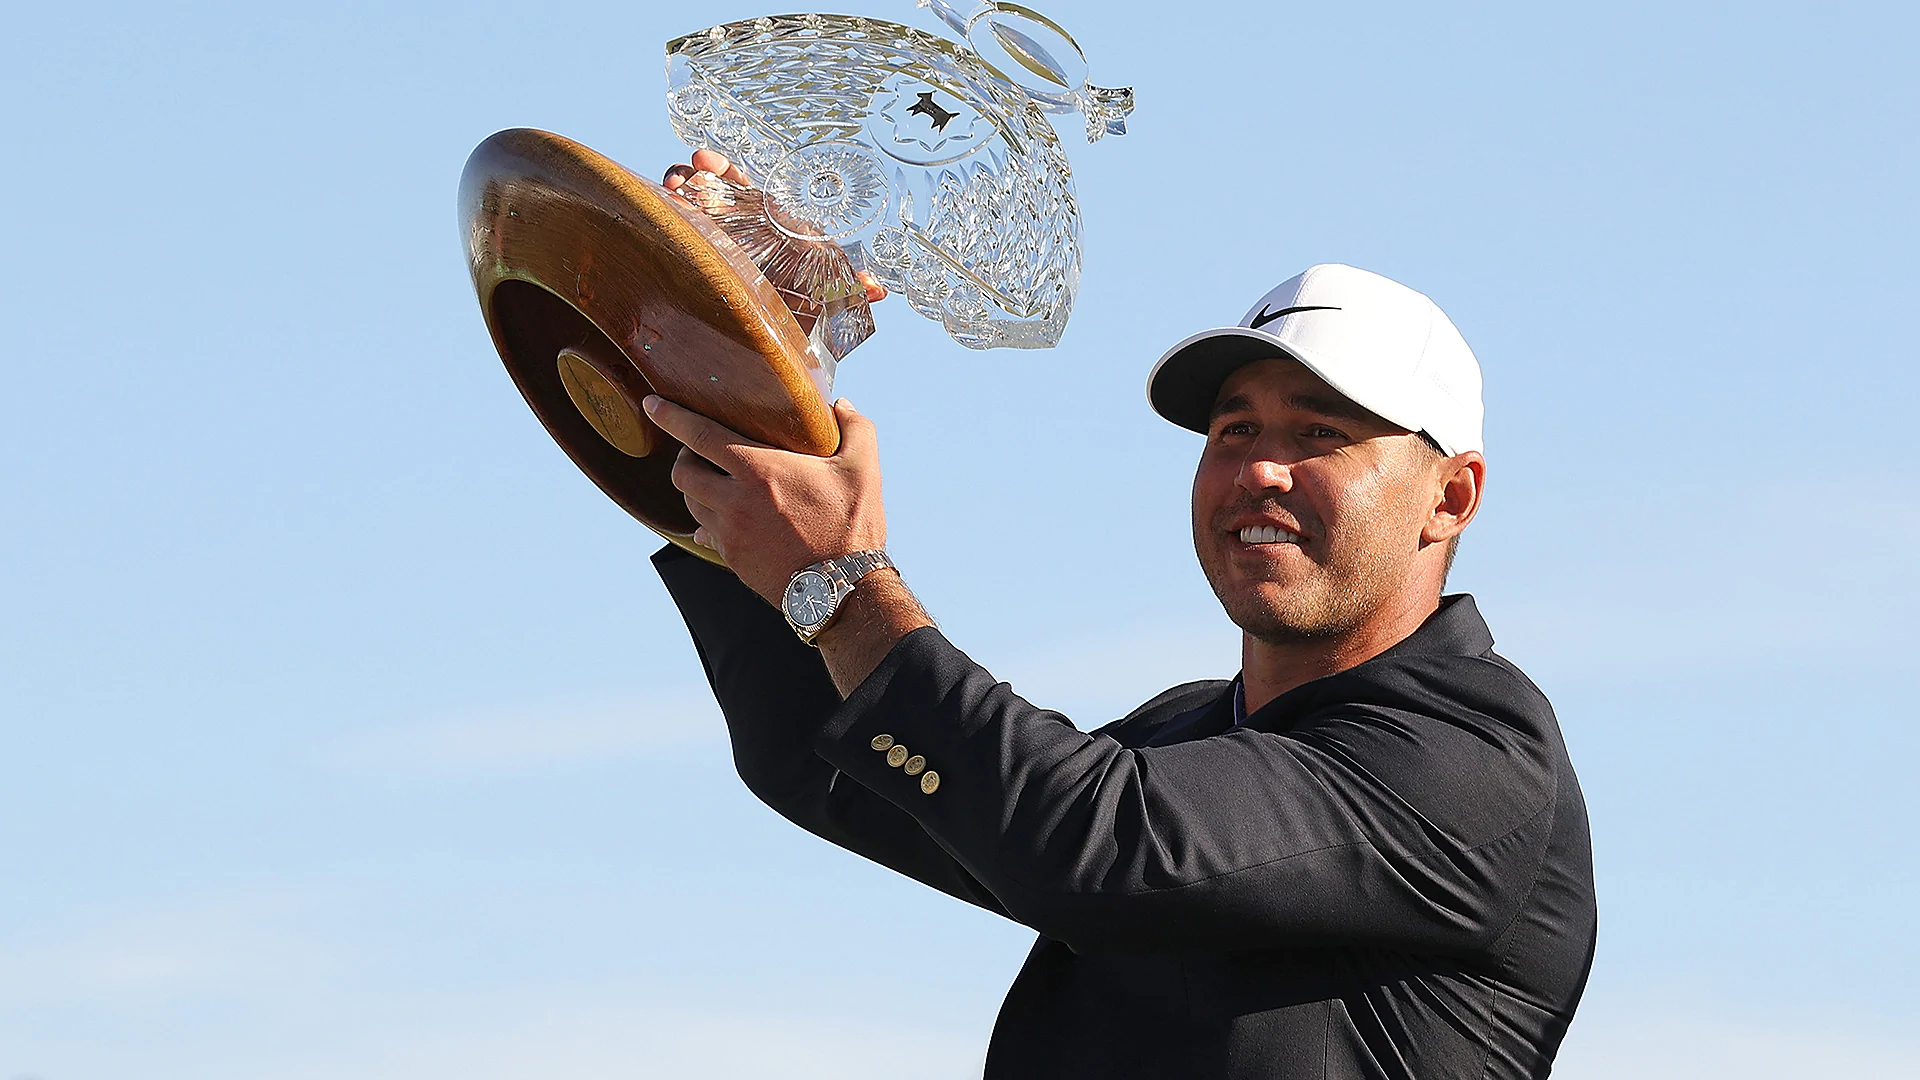 Brooks Koepka makes two eagles, rallies to win Waste Management Phoenix Open